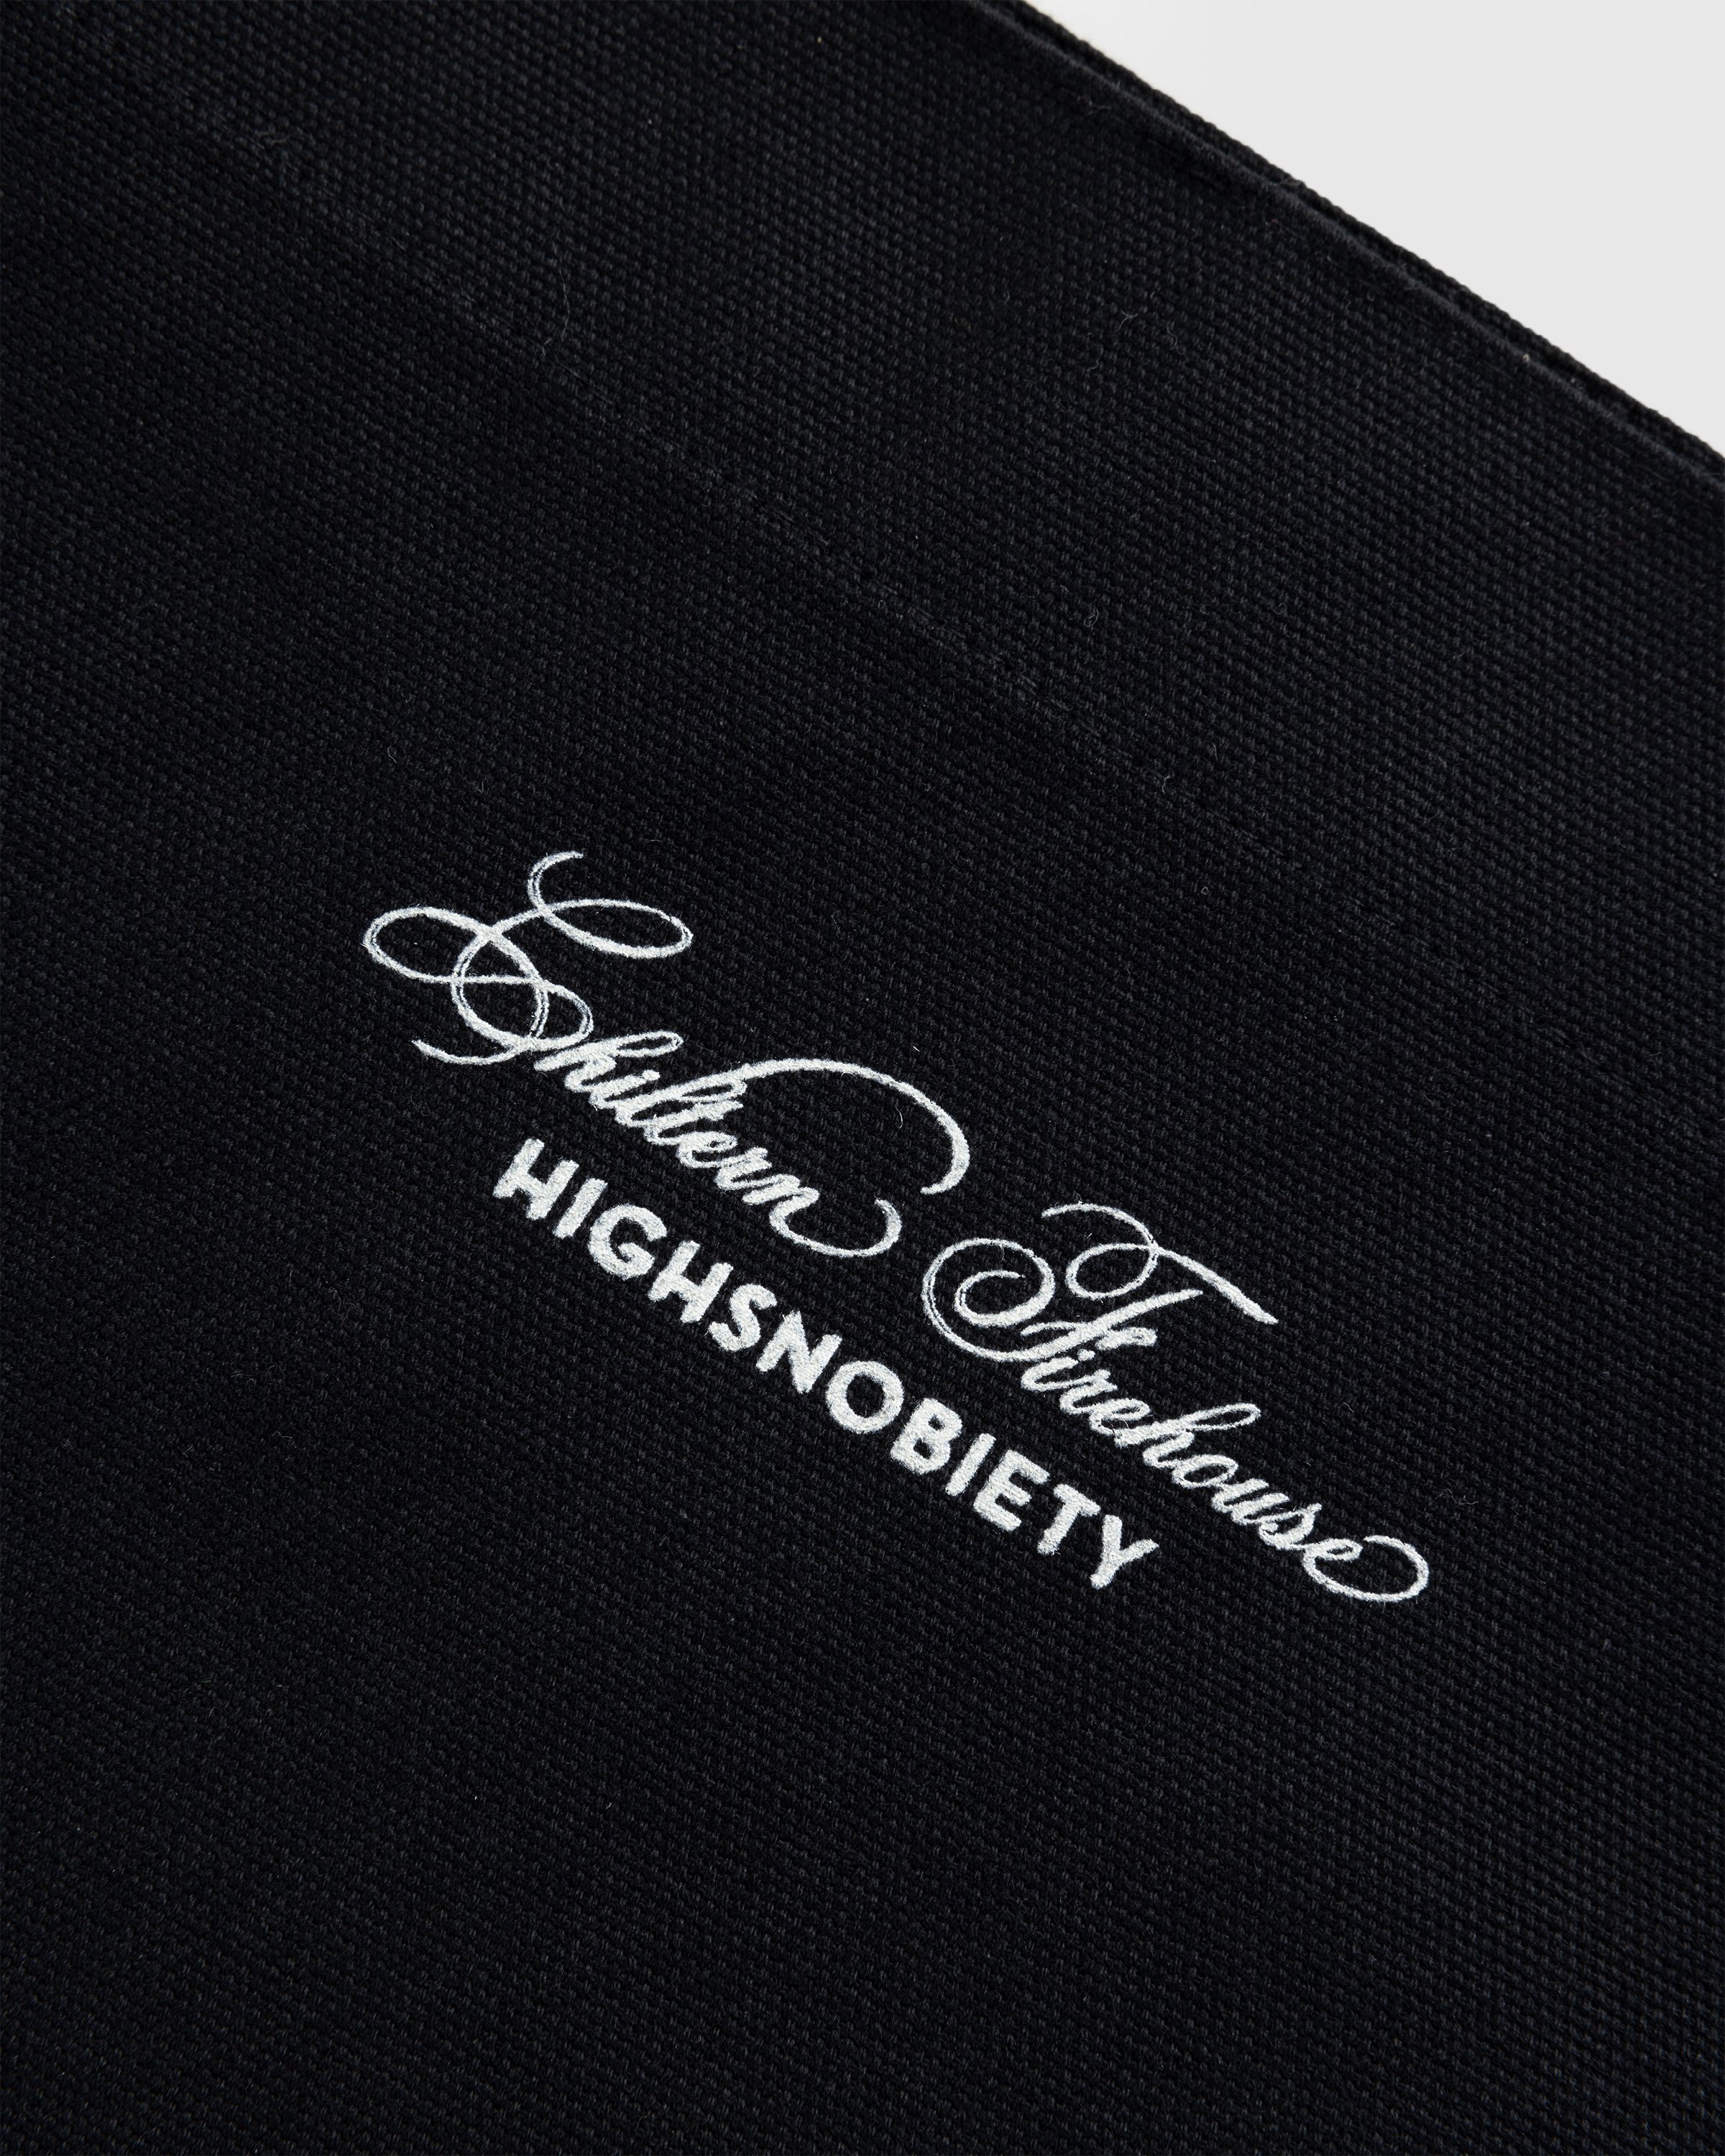 Chiltern Firehouse x Highsnobiety - Tote Bag - Accessories - Black - Image 6